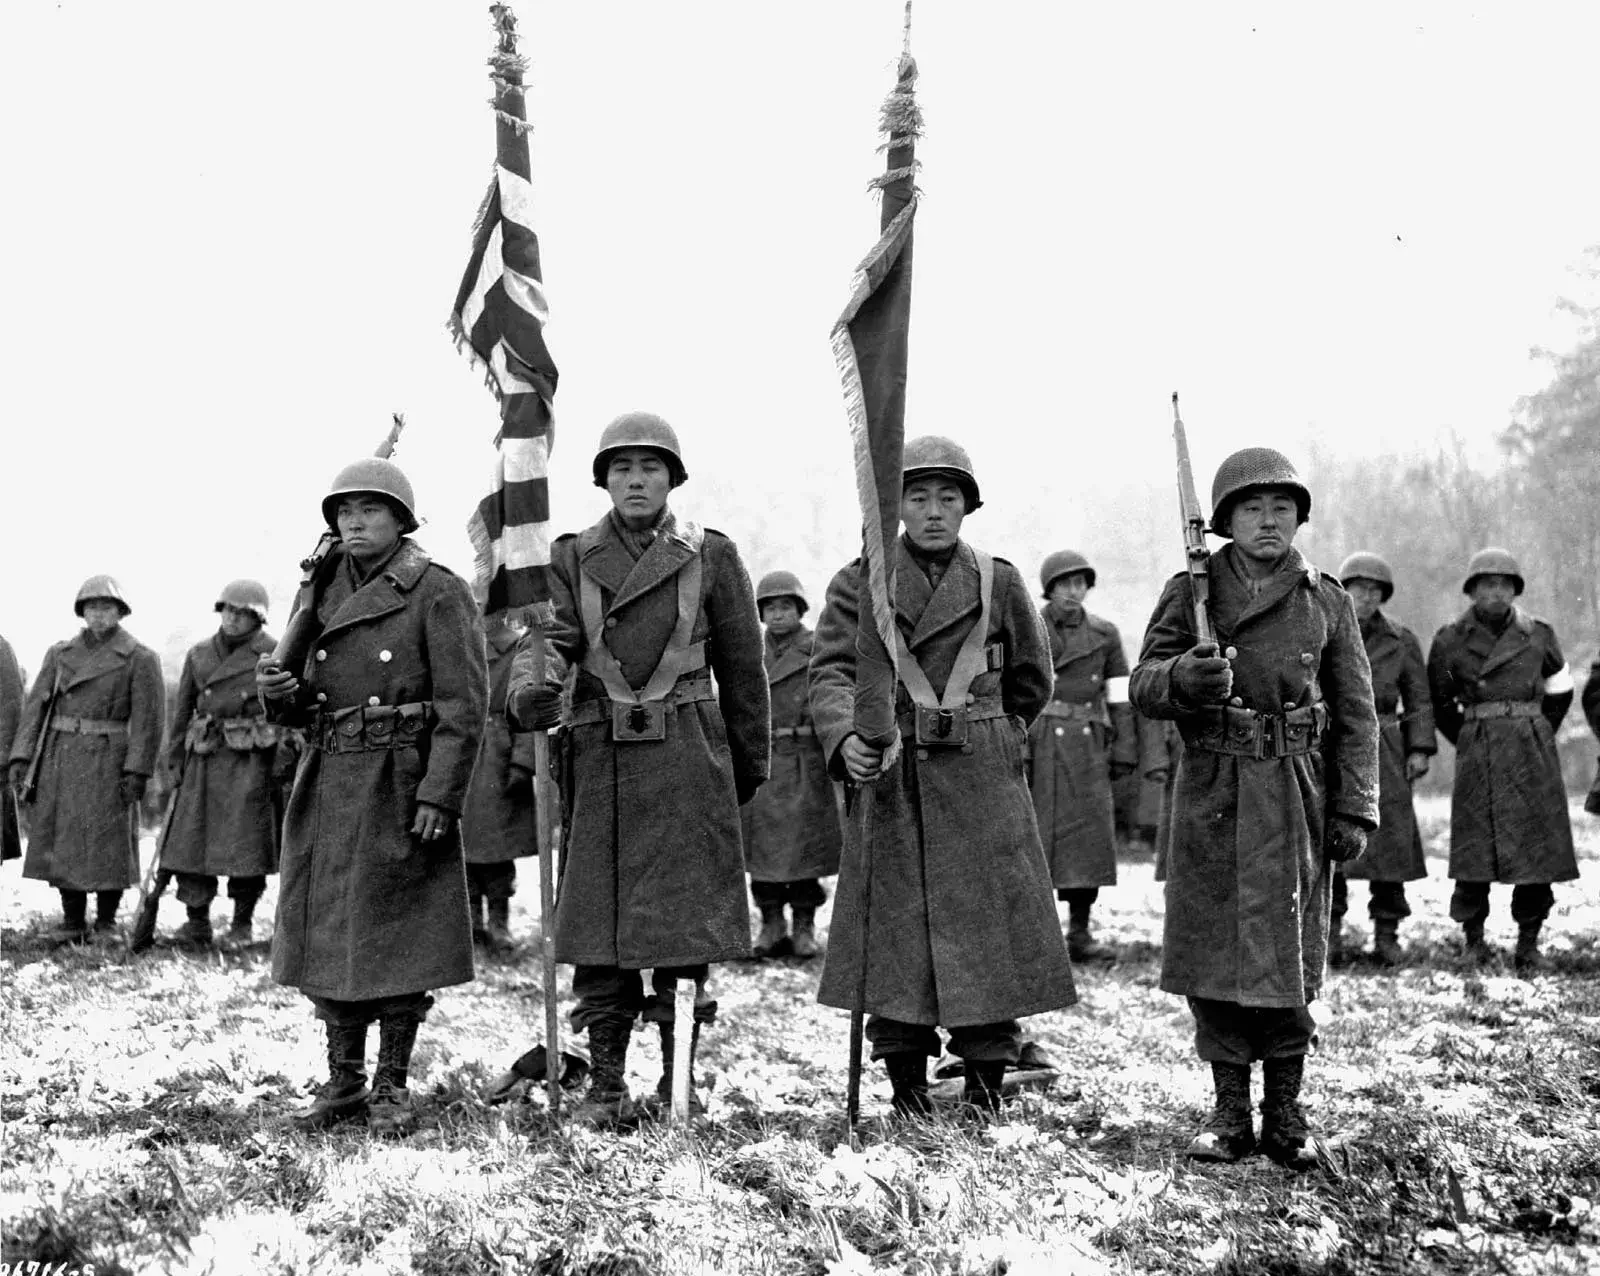 The 442nd Regiment: The Most Decorated Unit in U.S. Military History